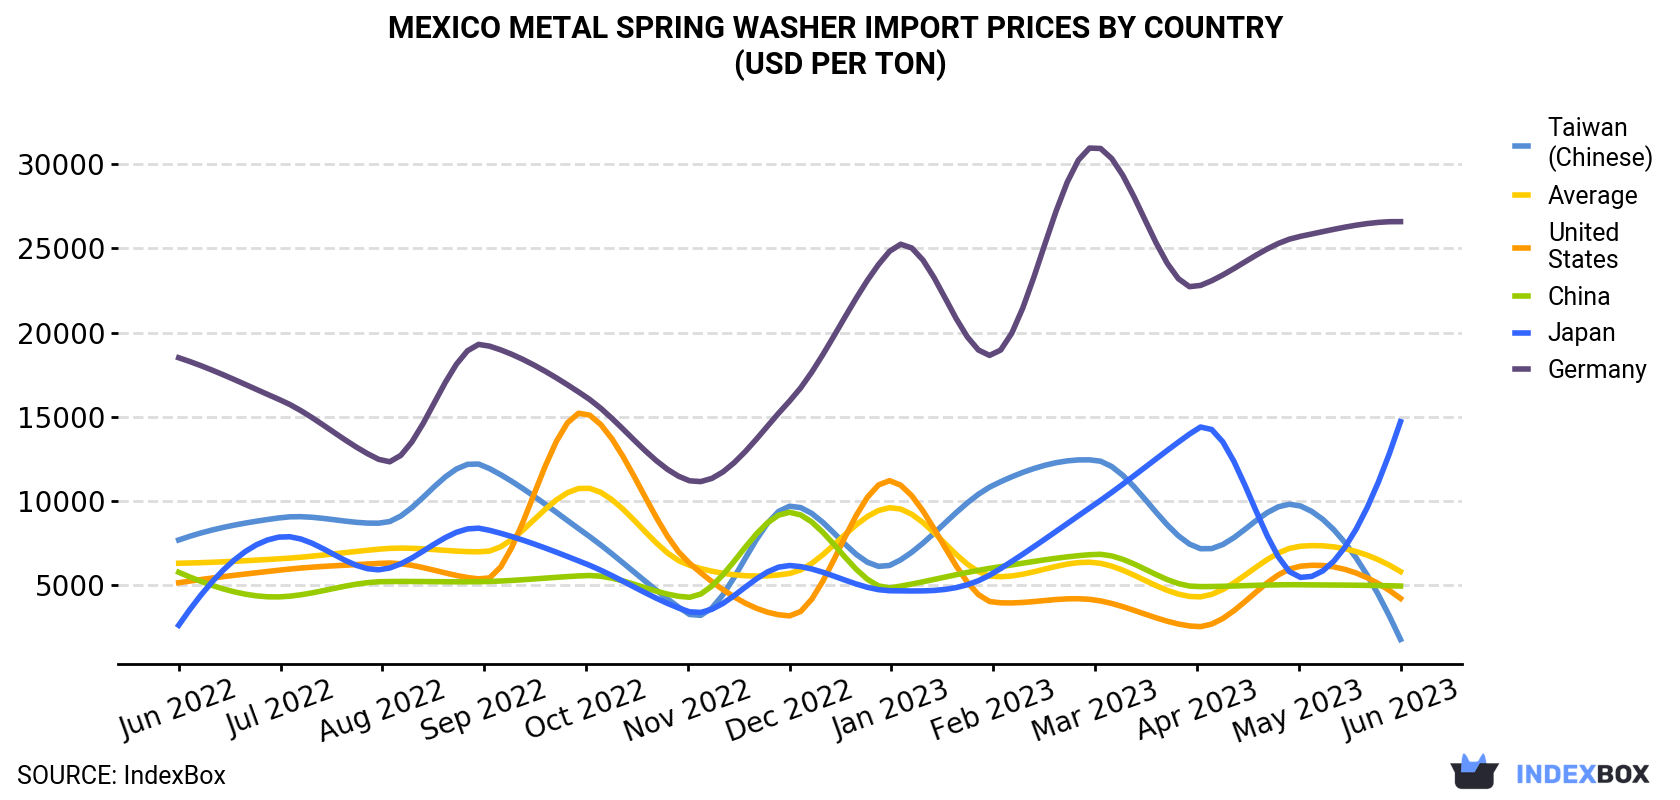 Mexico Metal Spring Washer Import Prices By Country (USD Per Ton)